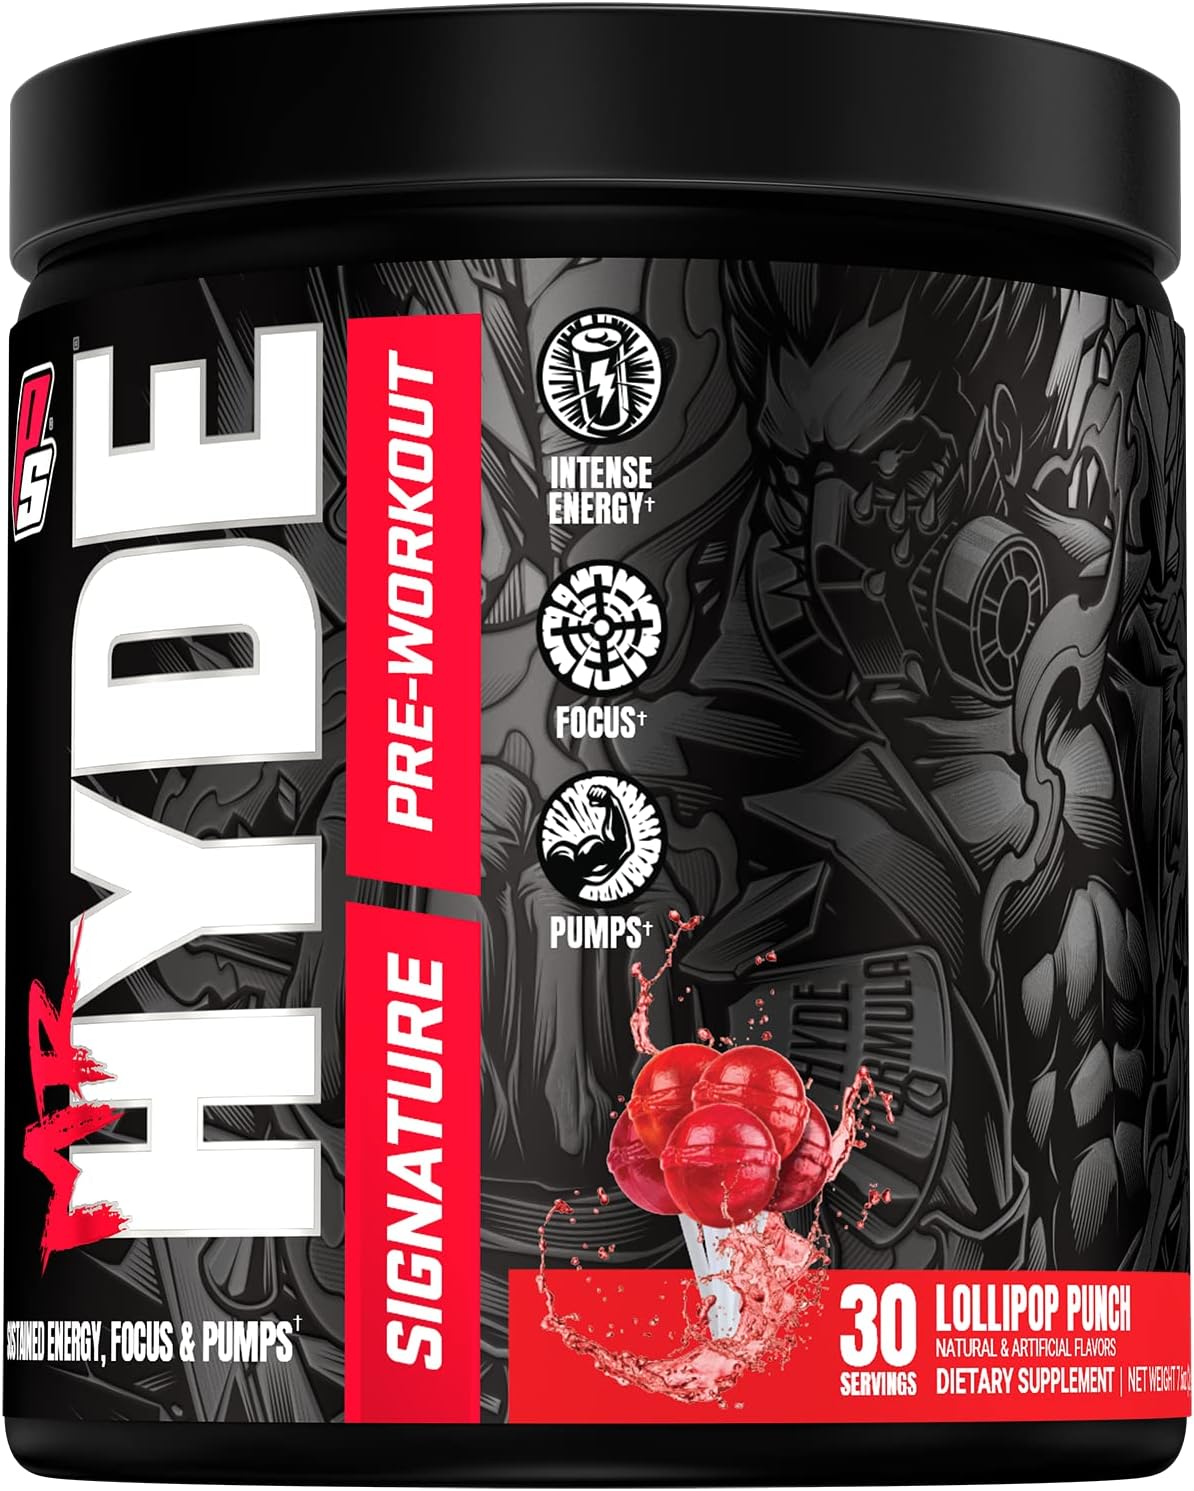 PROSUPPS Mr. Hyde Signature Series Pre-Workout Energy Drink ? Intense